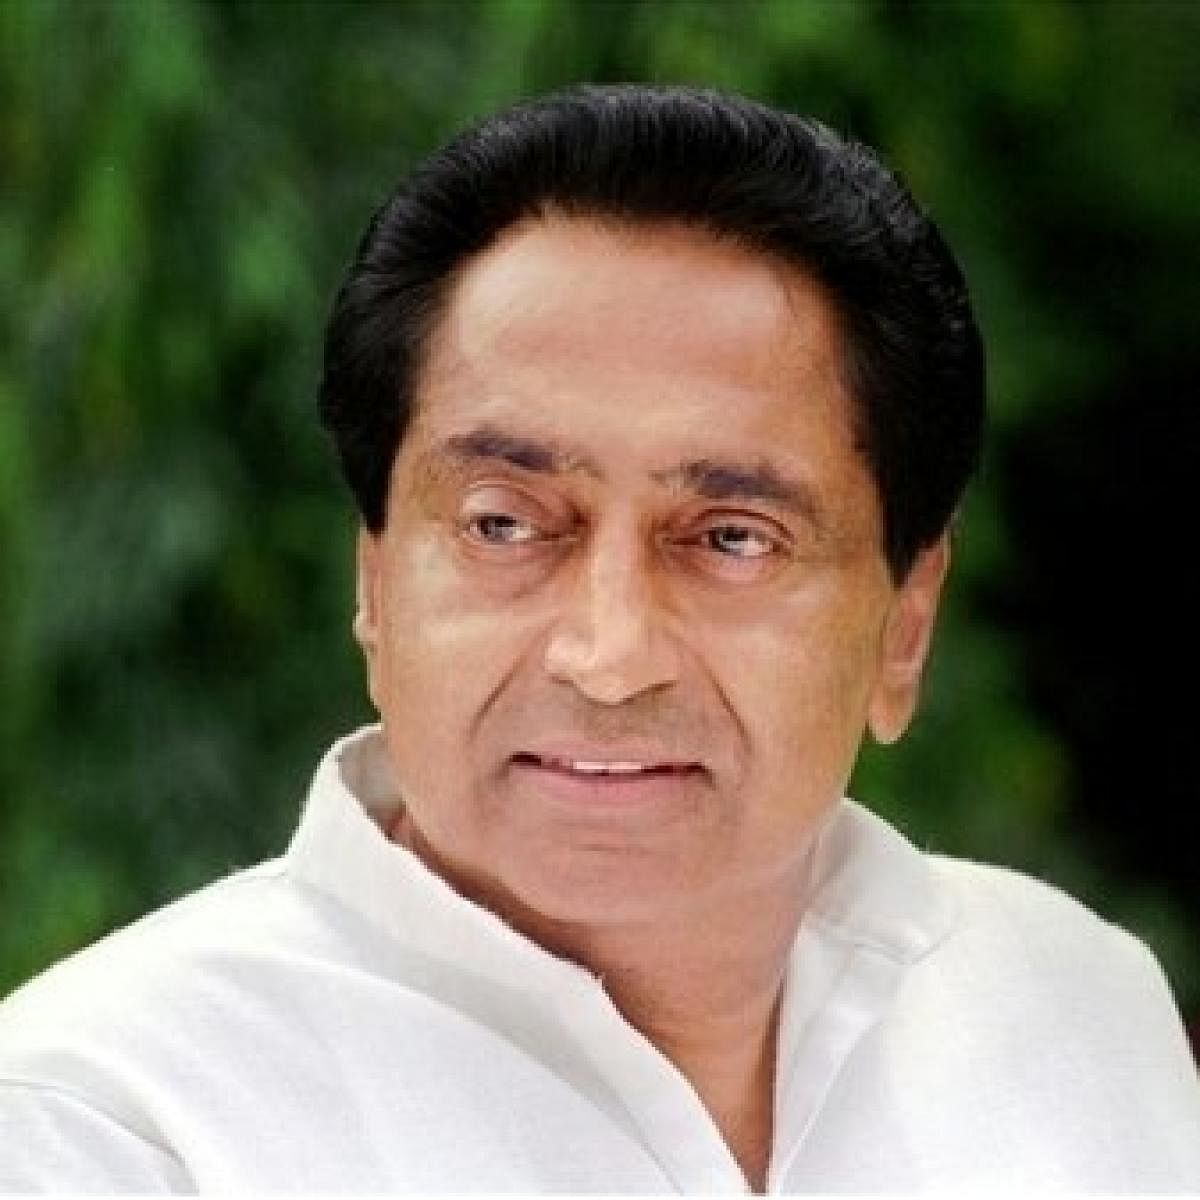 The Congress appointed senior leader Kamal Nath as president of its Madhya Pradesh unit. Pic @OfficeOfKN